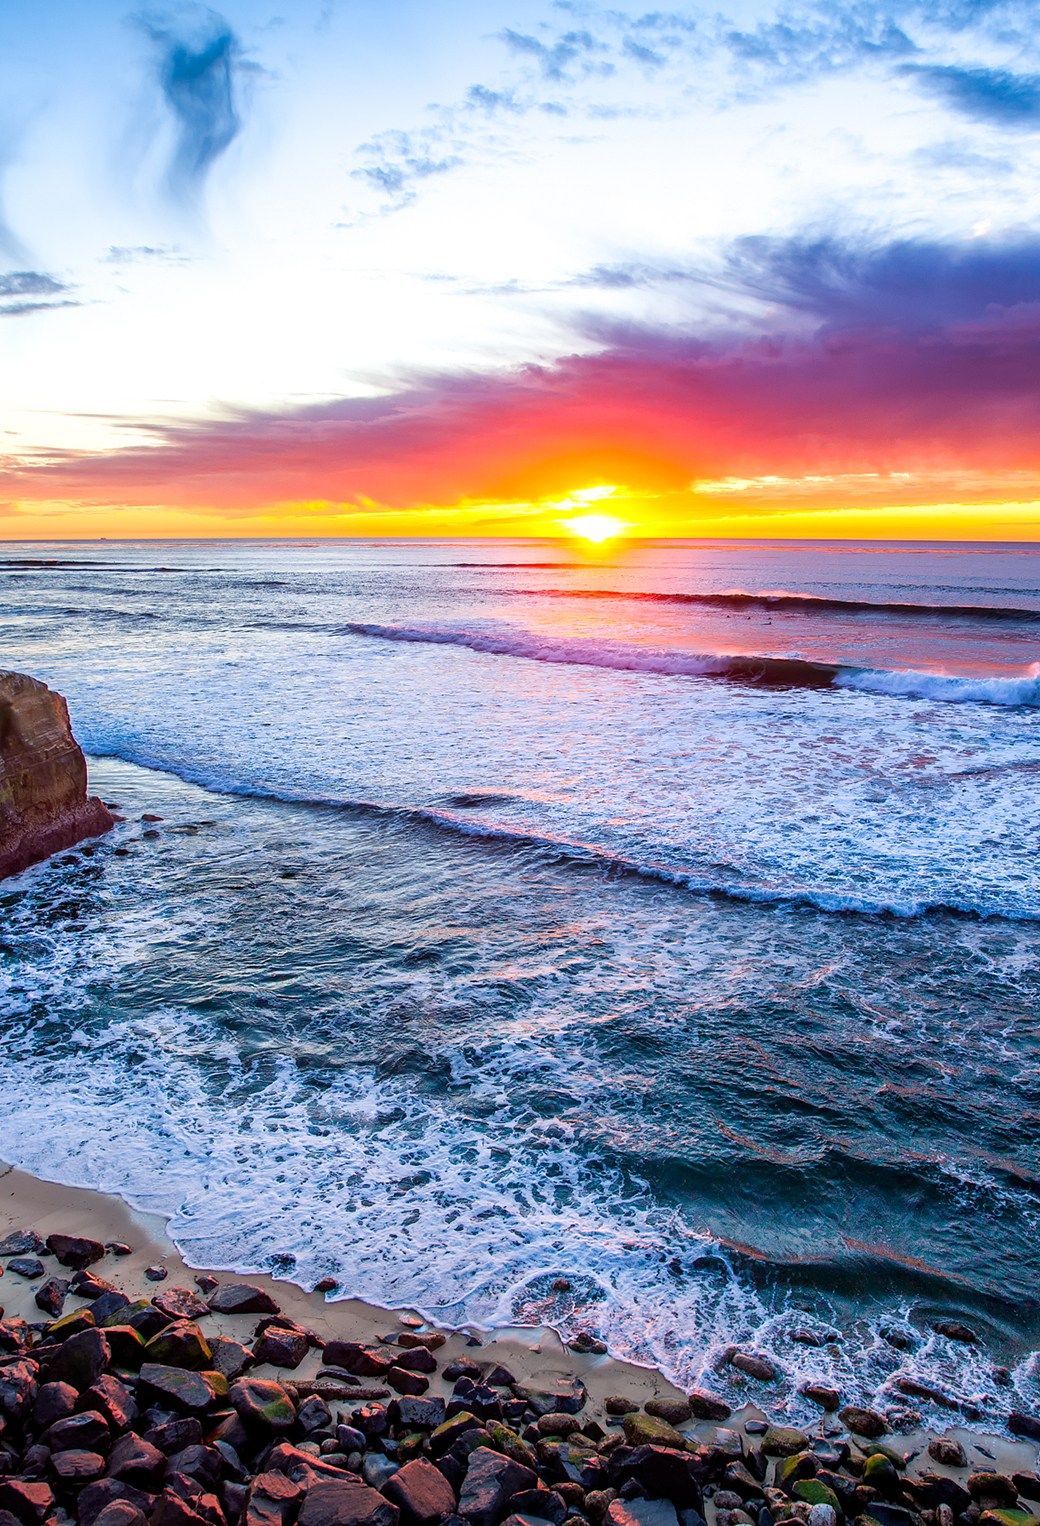 Ocean Sunset in San Diego Wallpaper for iPhone Pro Max, X, 8